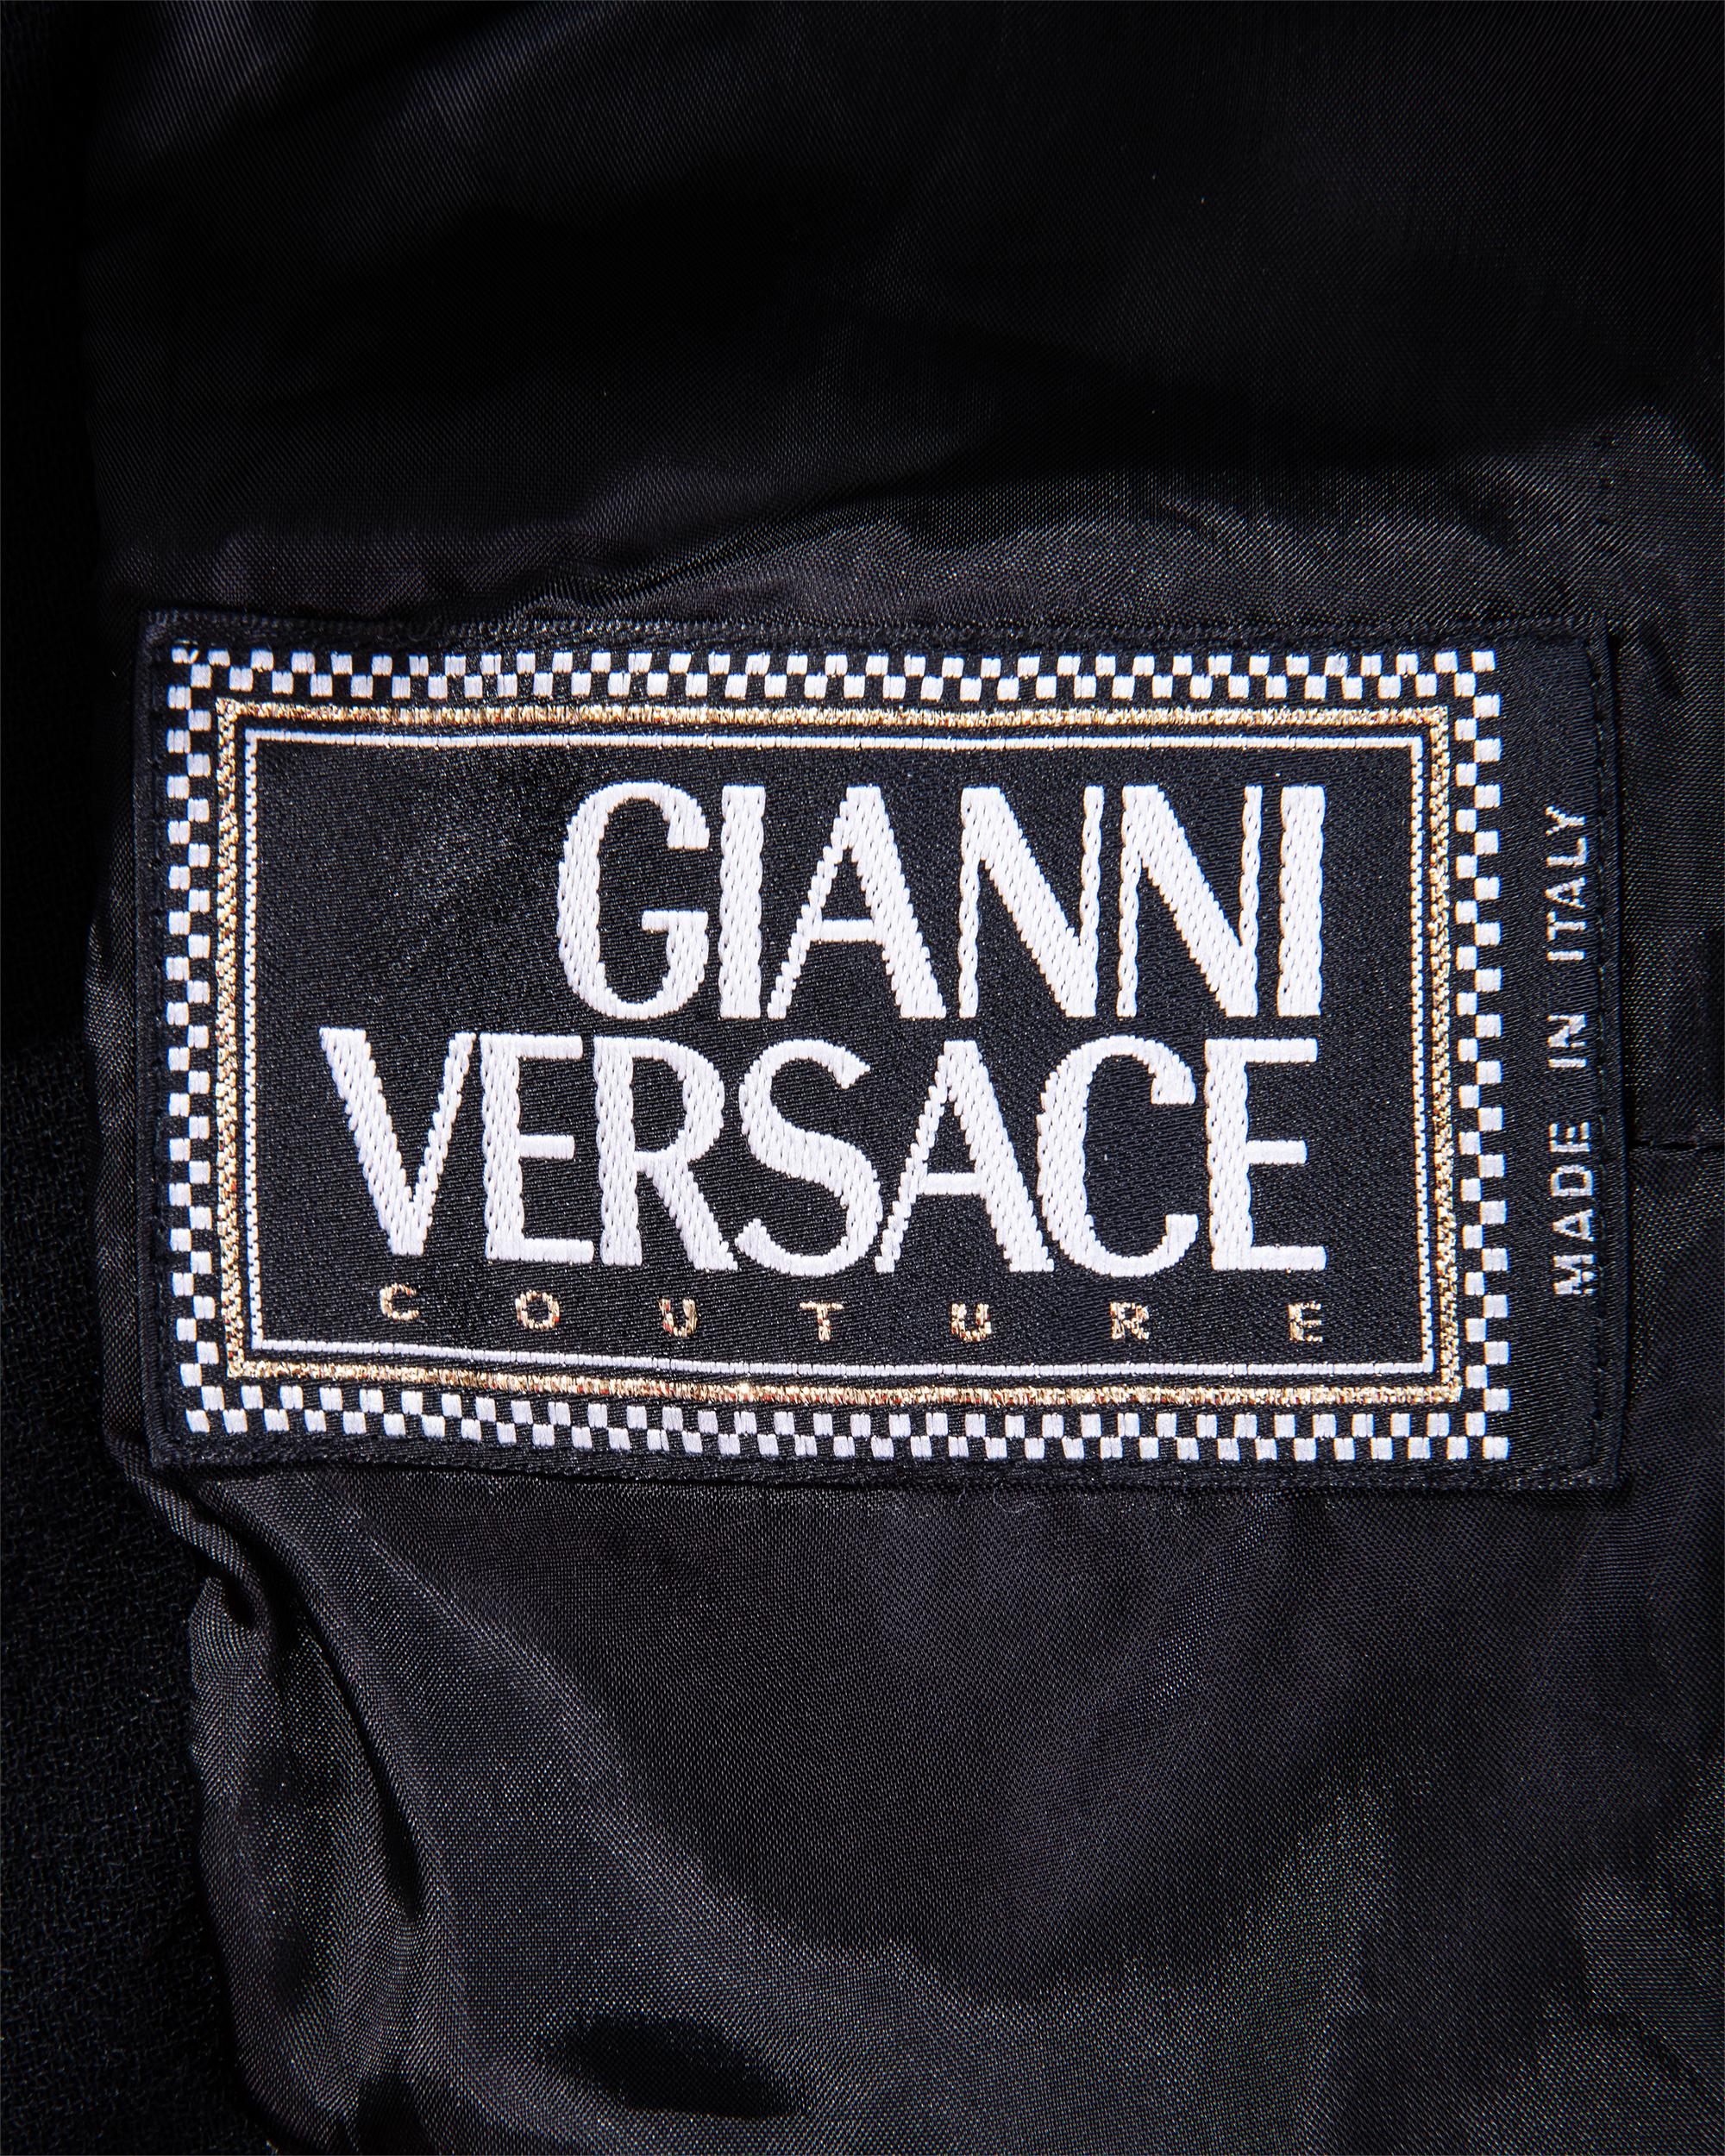 S/S 1995 Gianni Versace Double-Breasted Wool Blazer and Short Set 10